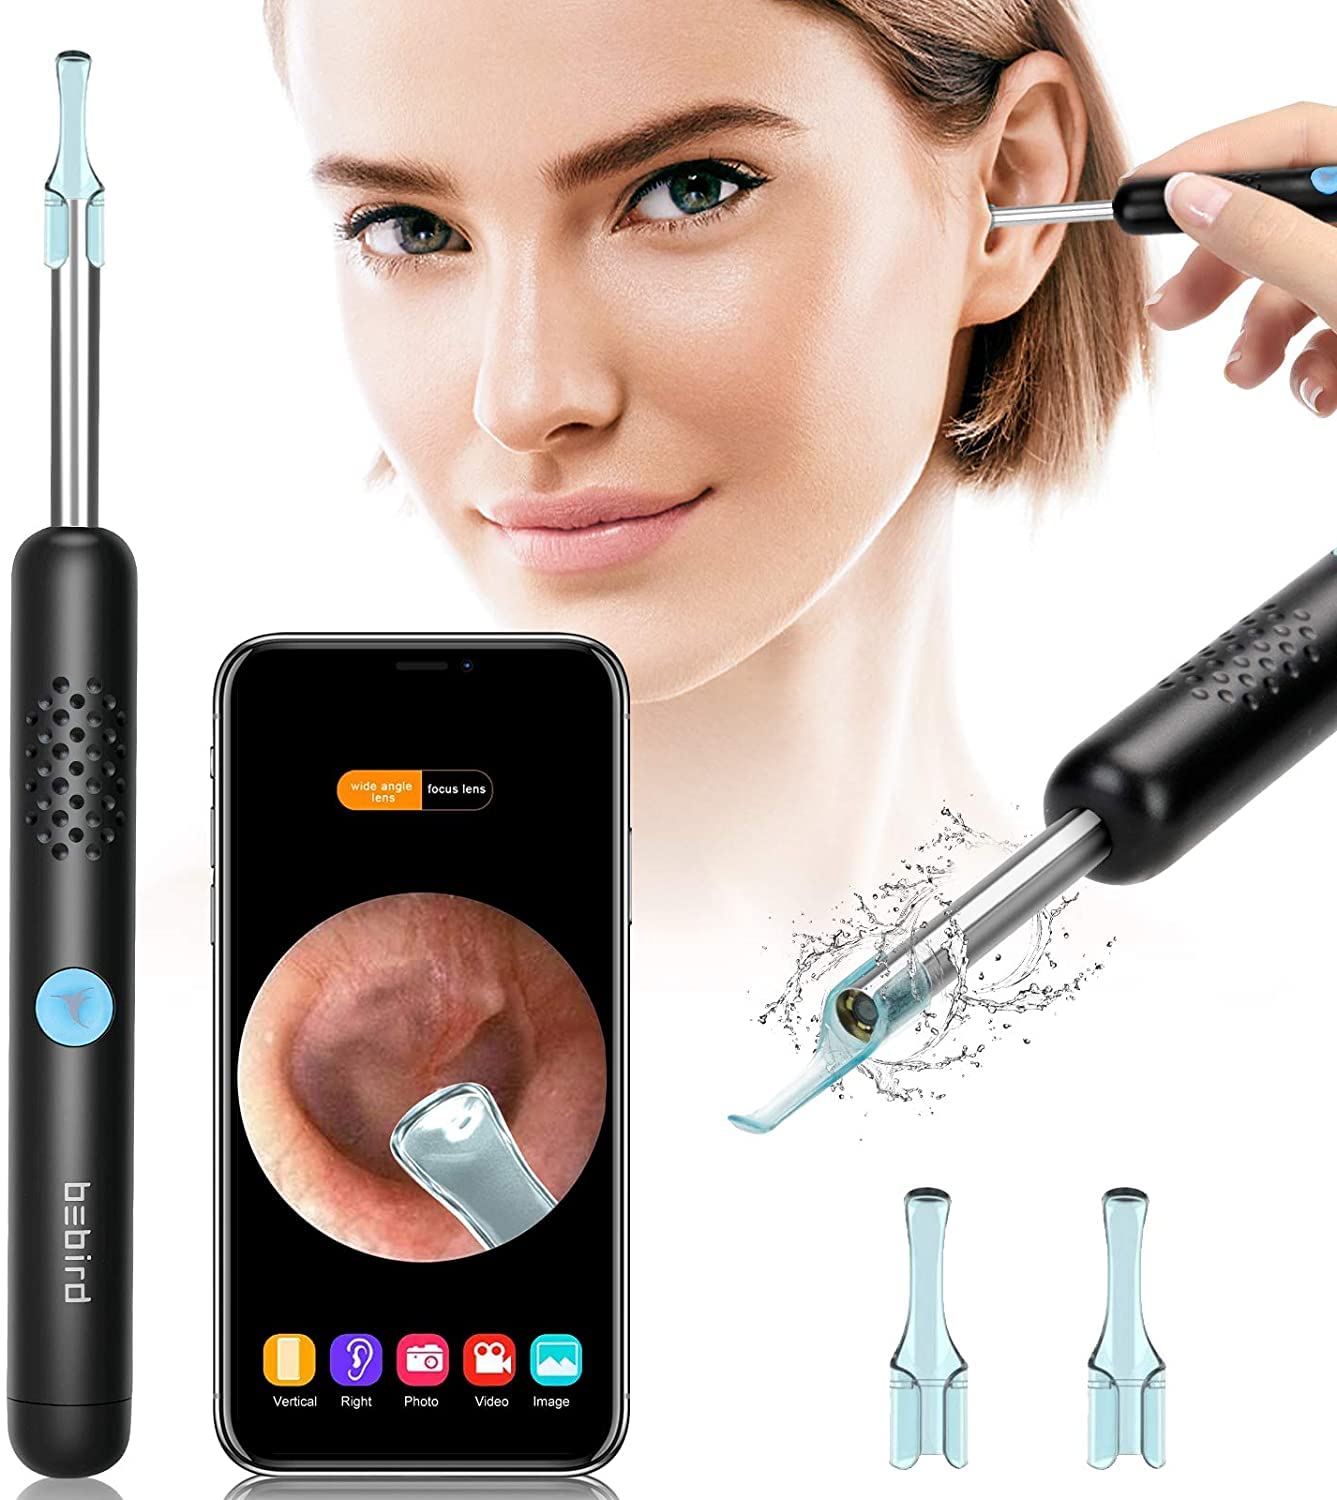 Ear Wax Removal with Camera Wireless Ear Cleaner Tool Kit 1080P